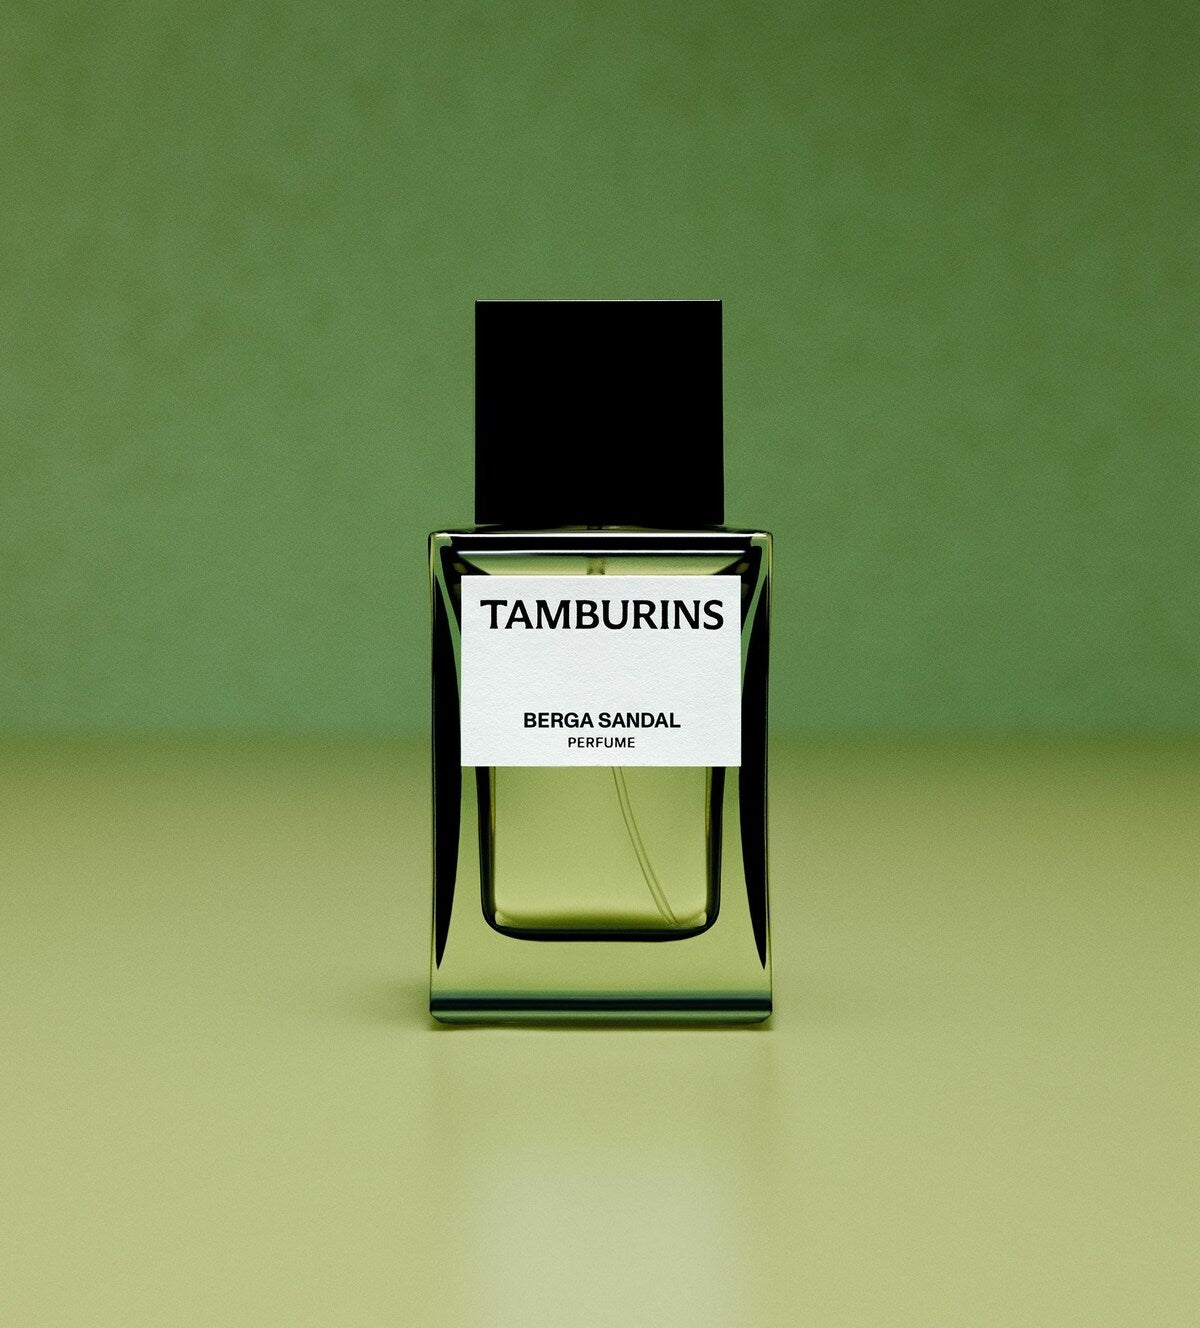 A bottle of Tamburins perfume on a table.